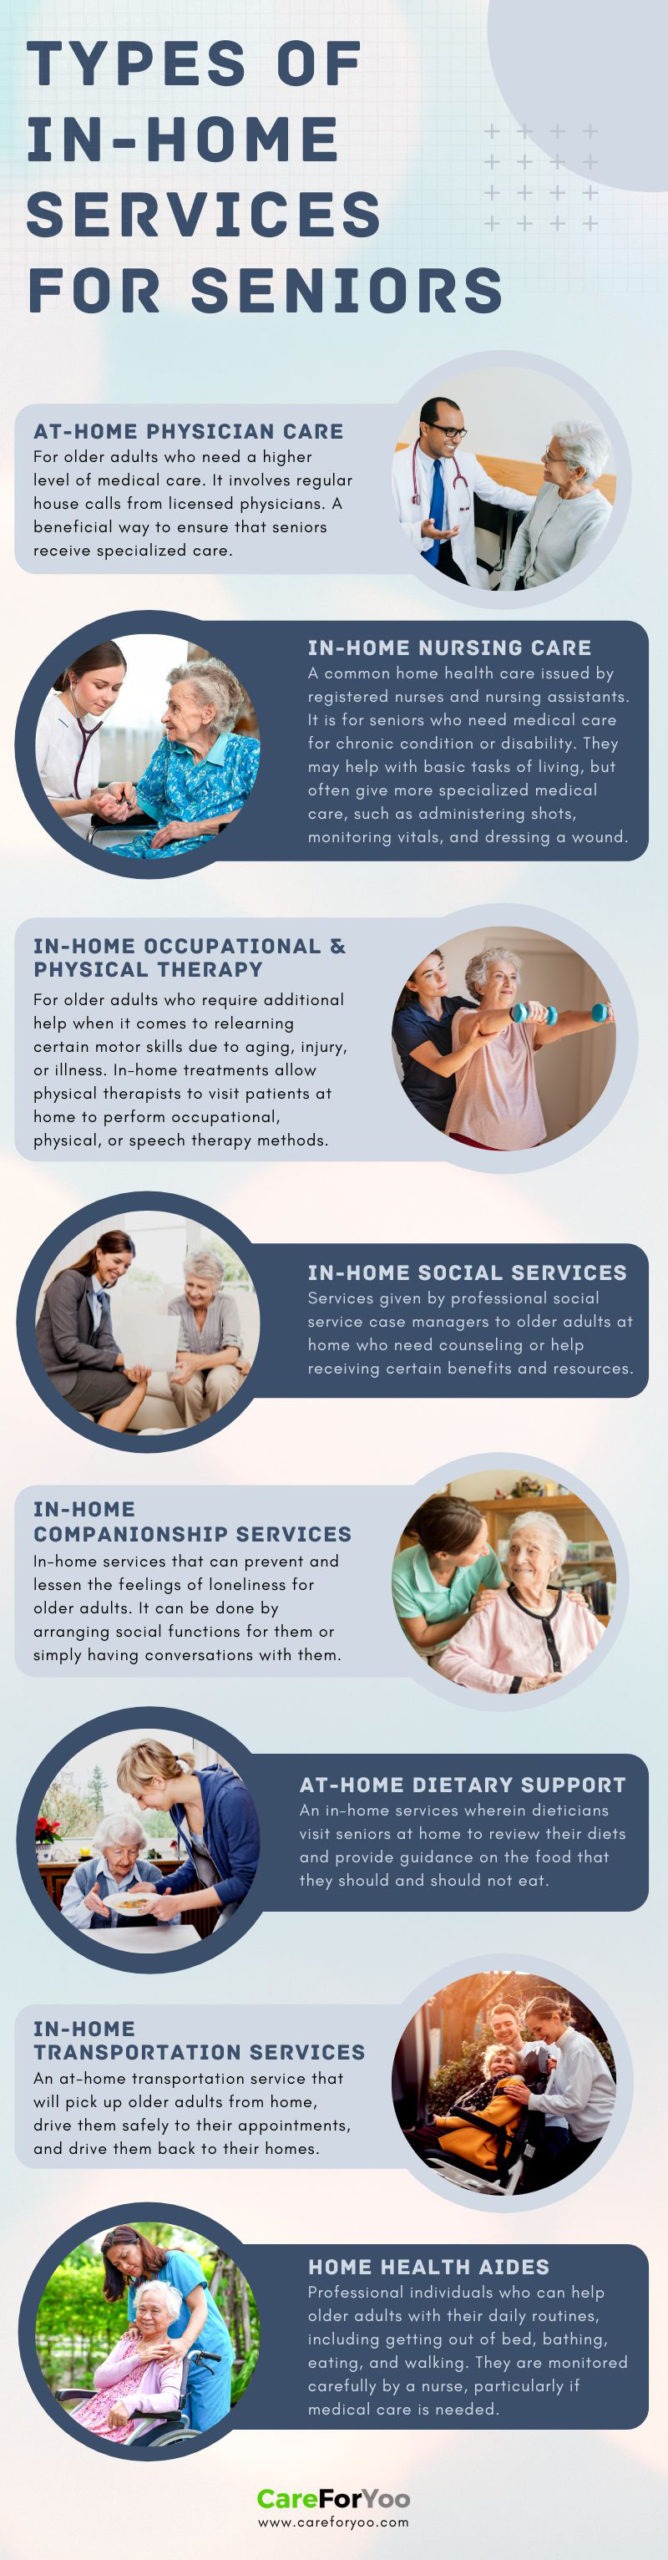 Types Of In-Home Services For Seniors